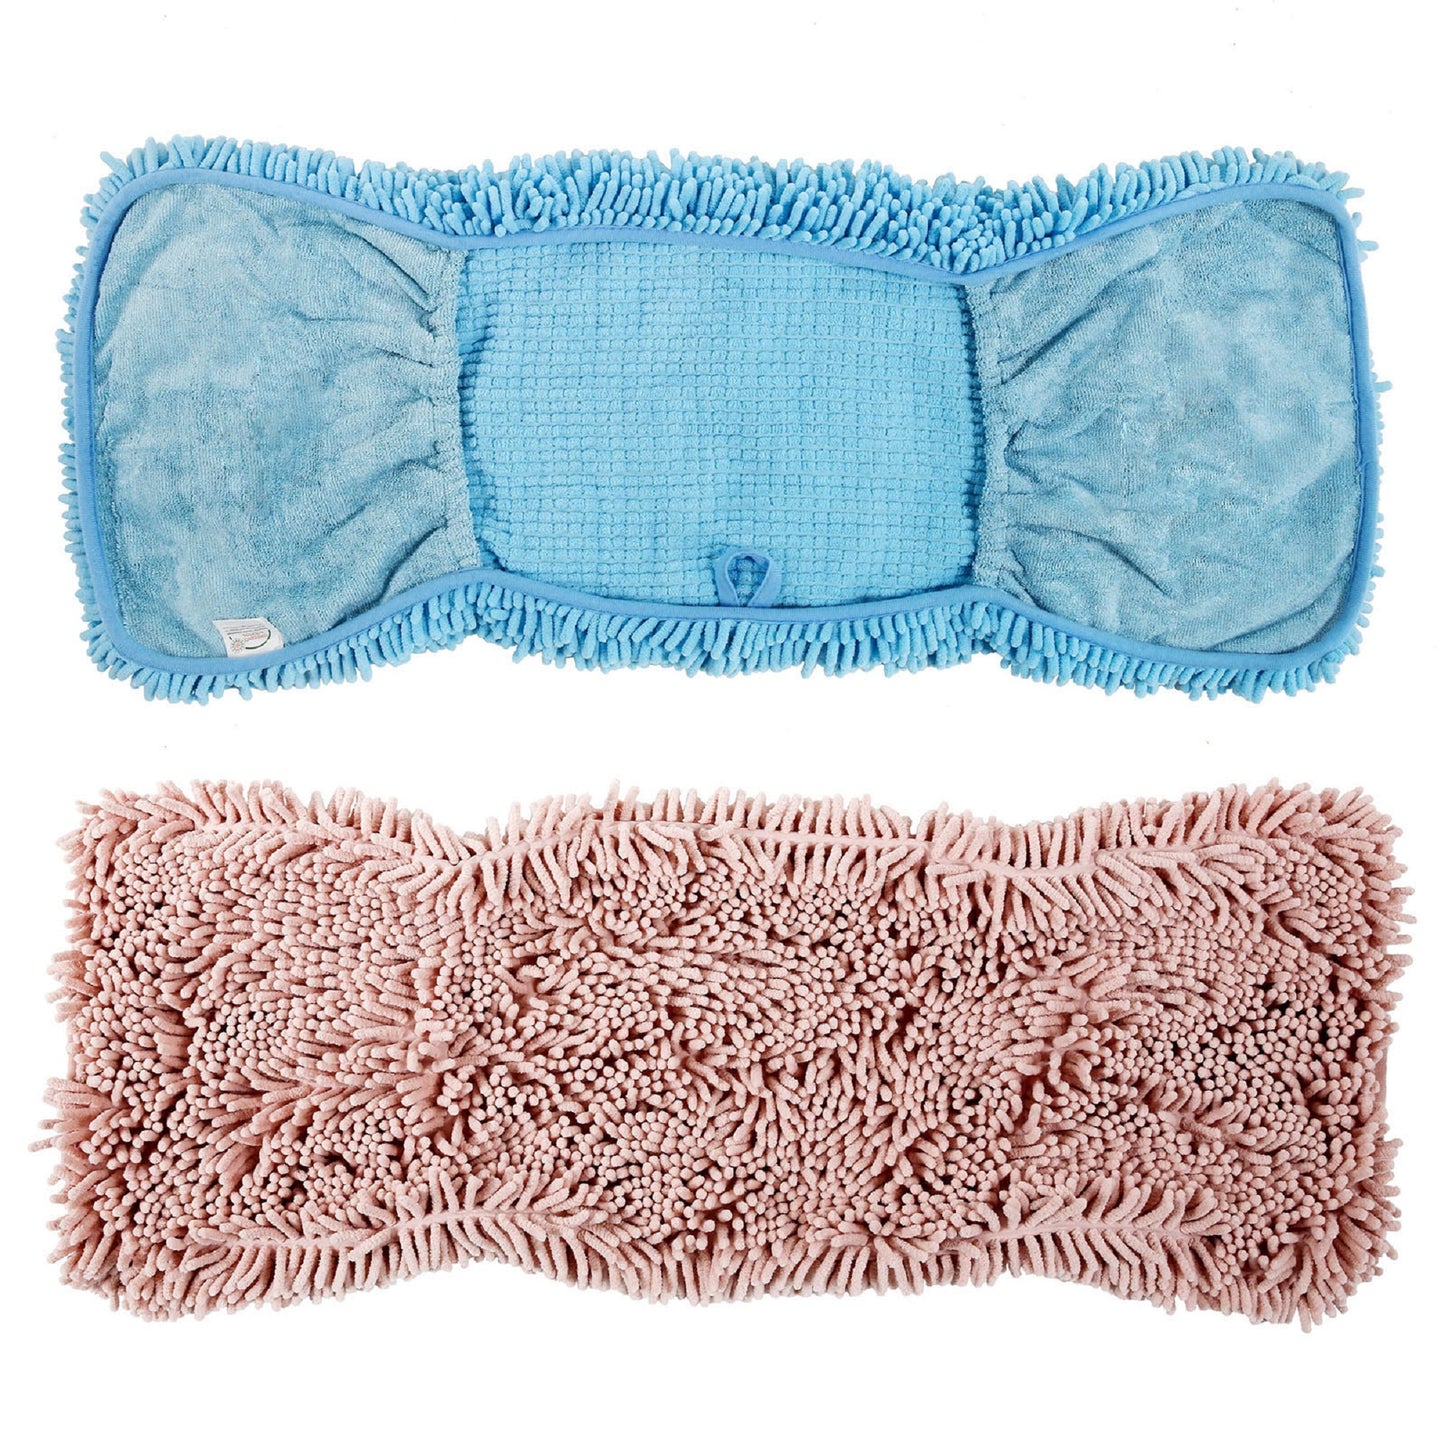 2 Pack Luxury Absorbent Dog Towels, (35"x15") Extra Large Microfiber Quick Drying Dog Shammy with Hand Pockets Pet Towel for Dog and Cat, Machine Washable (Blue+Pink)